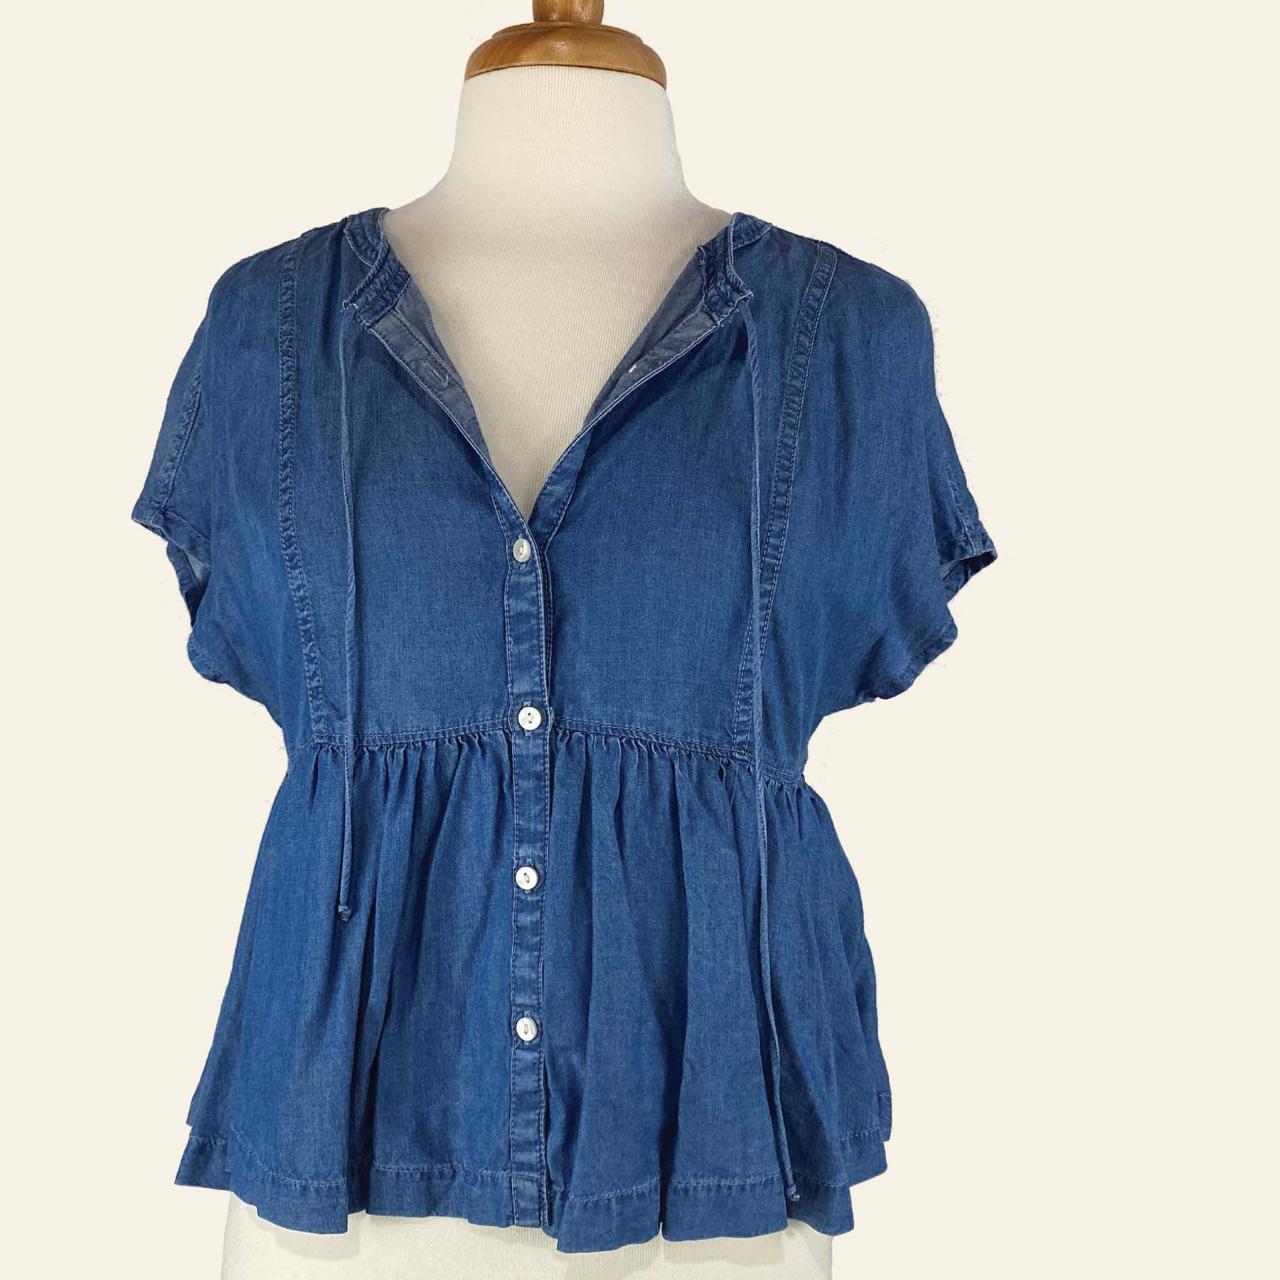 Aerie Gathered Babydoll Top/Blouse in Light Wash... - Depop